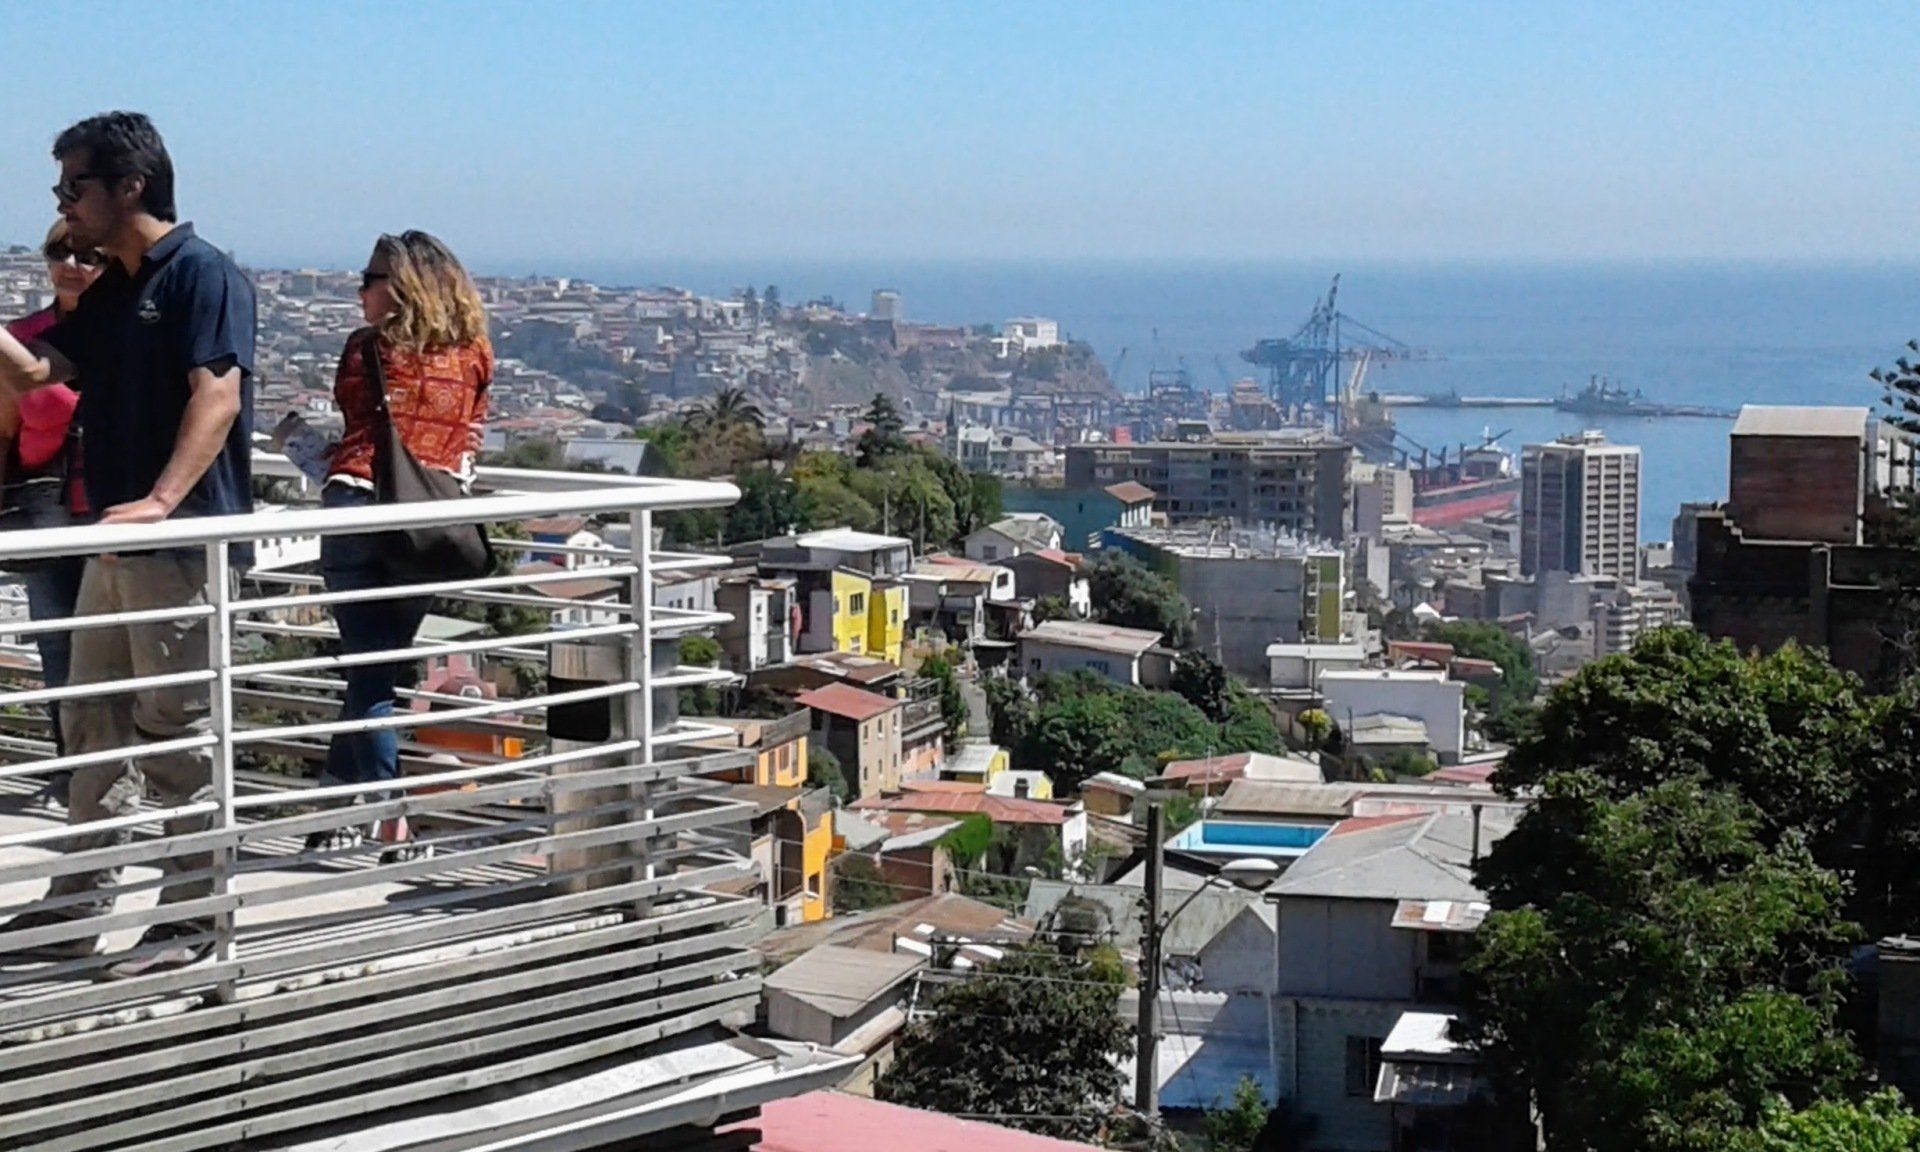 A woman enjoying the beautiful view in front of Valparaiso